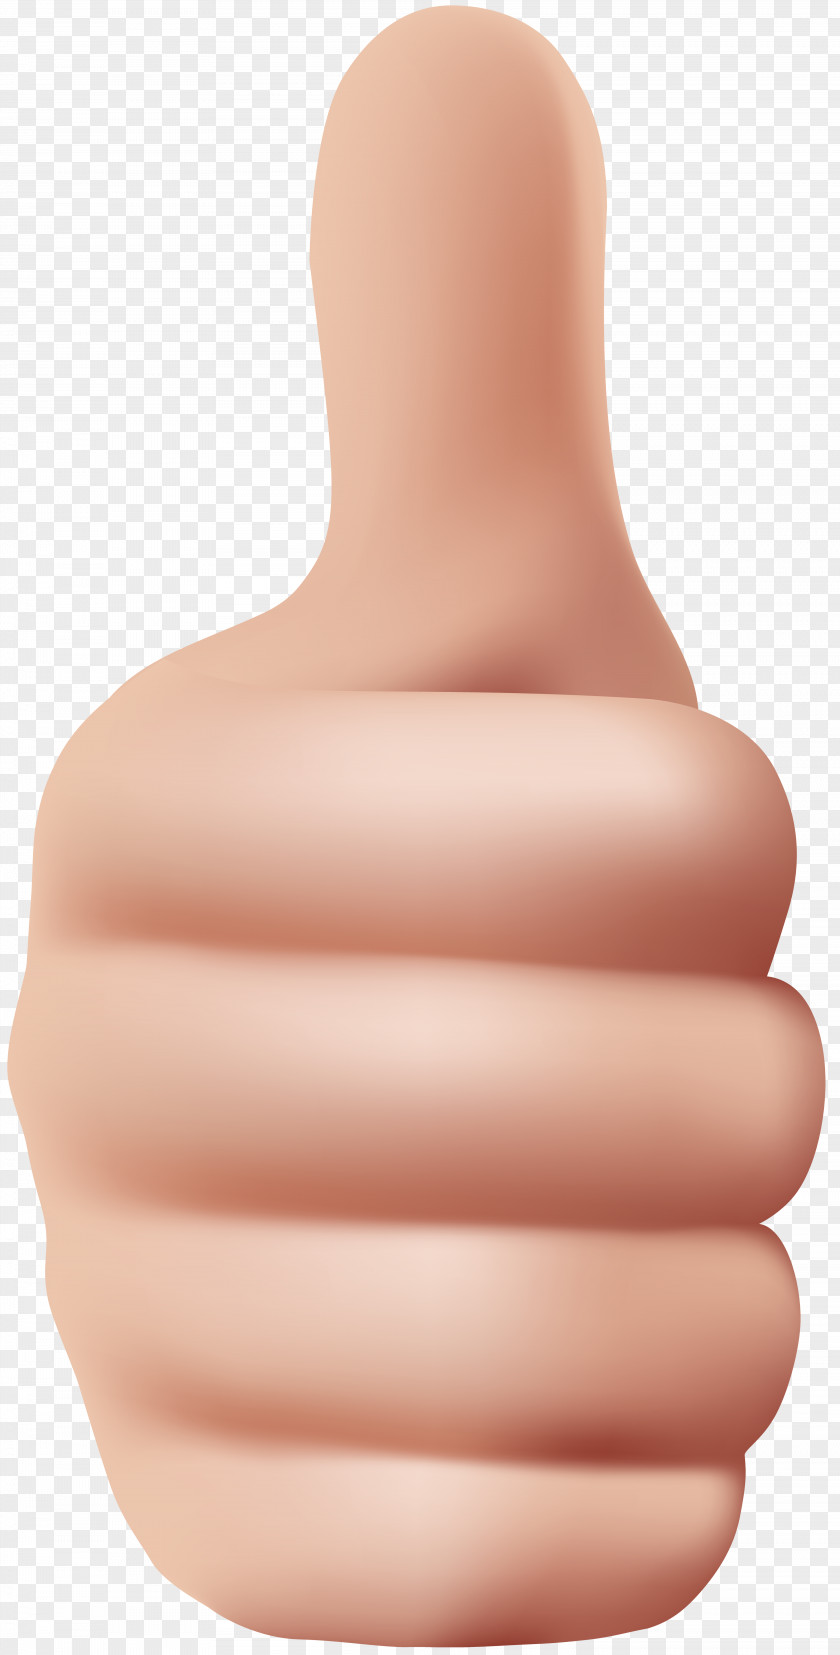 Thumbs Up Clip Art Image Thumb Hand Model Product PNG